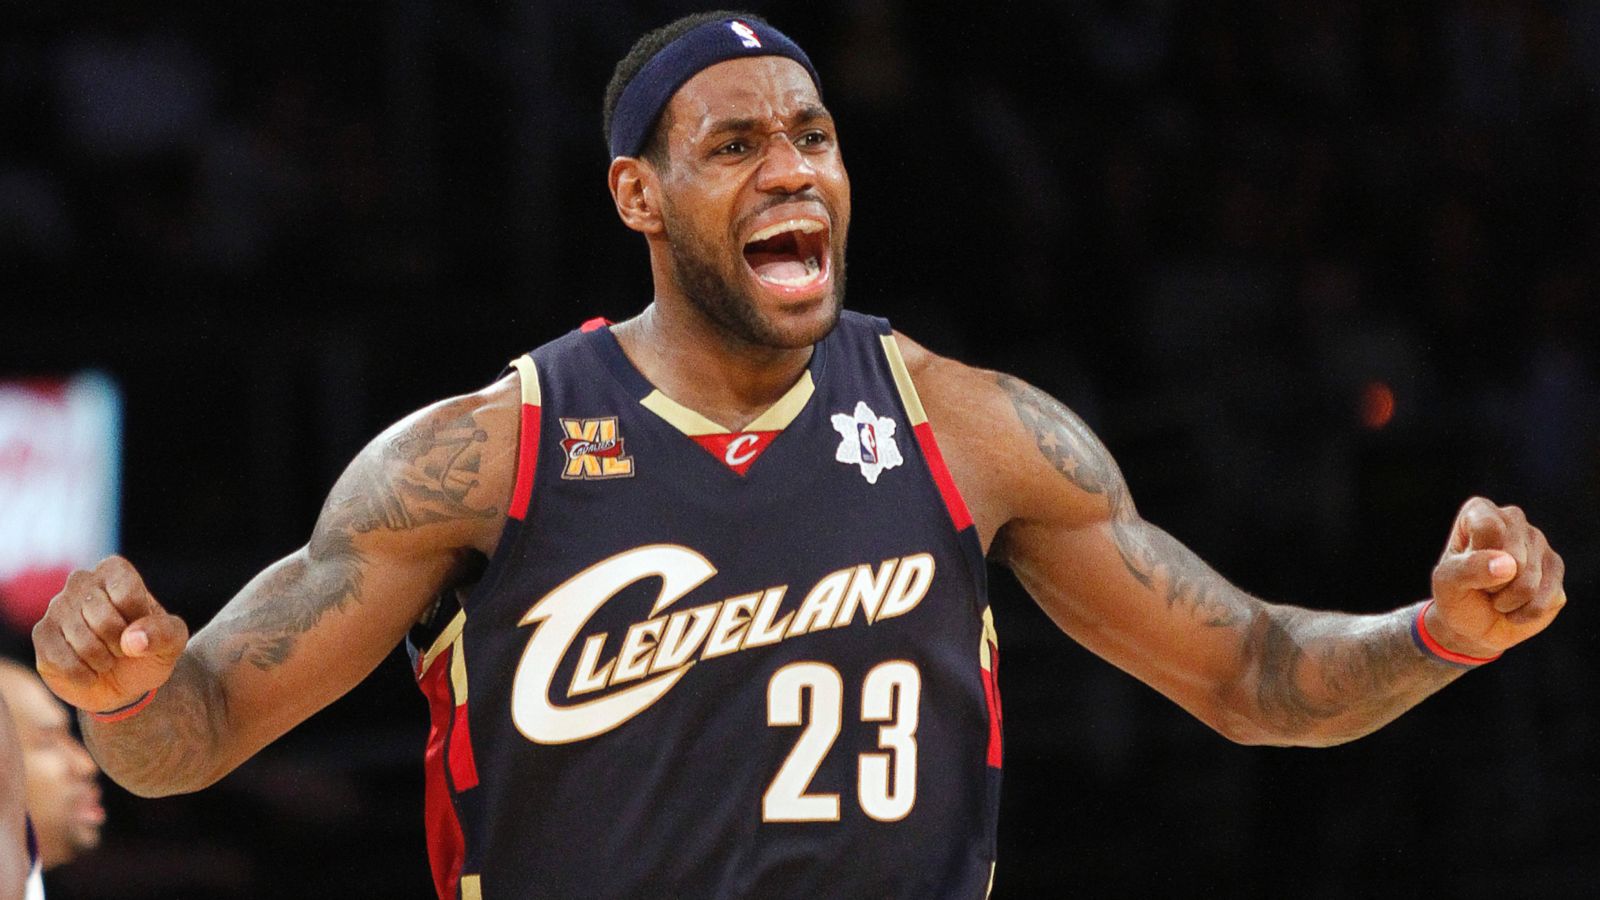 LeBron James to go back to No. 23 for Cleveland Cavaliers return - ESPN